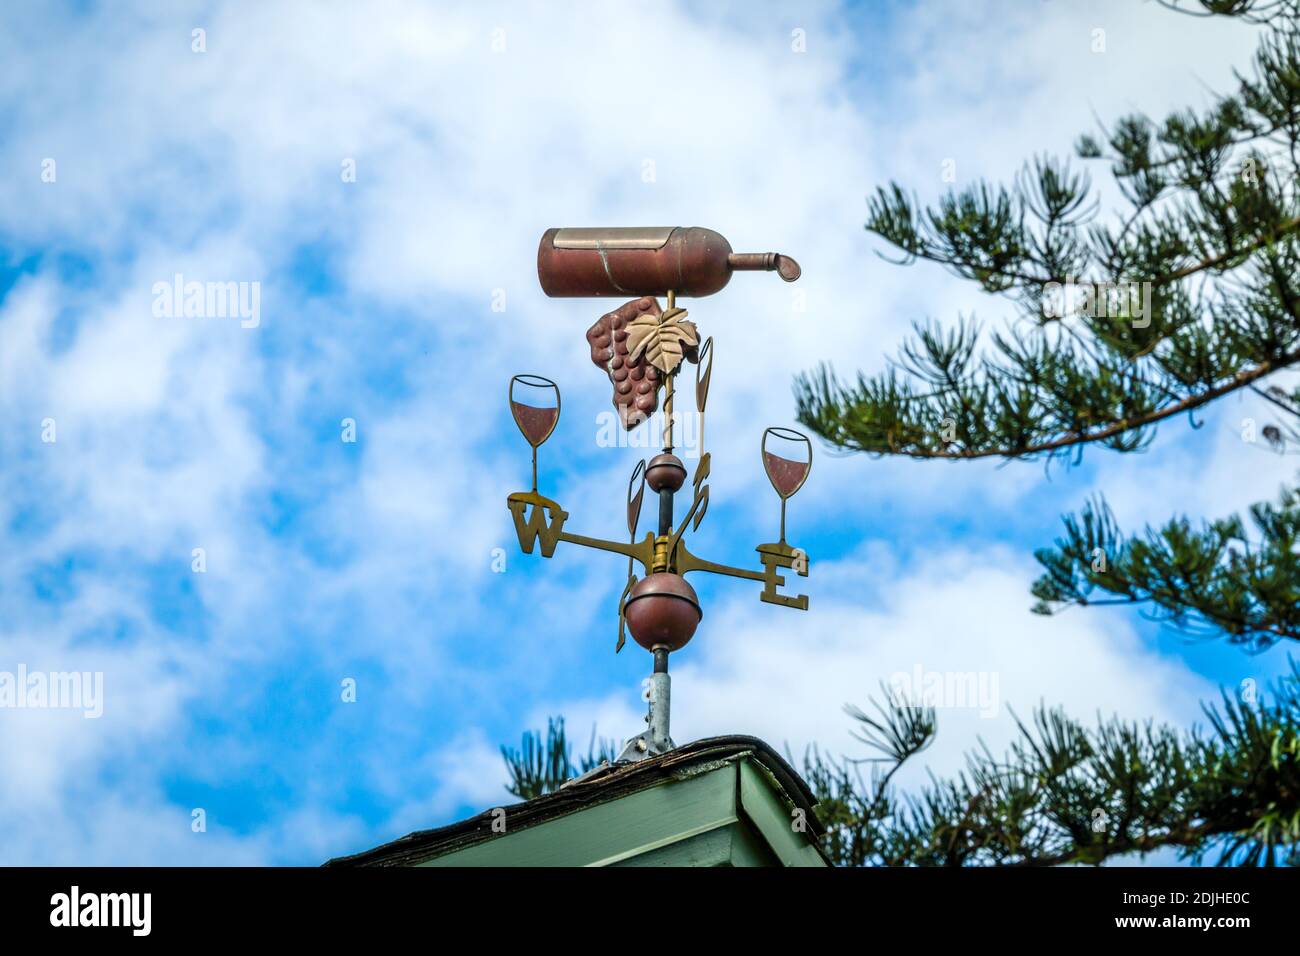 Maui, Hawaii, Upcountry, MauiWine (formerly known as Tedeshi Winery), Wine Bottle Wind Vane Stock Photo